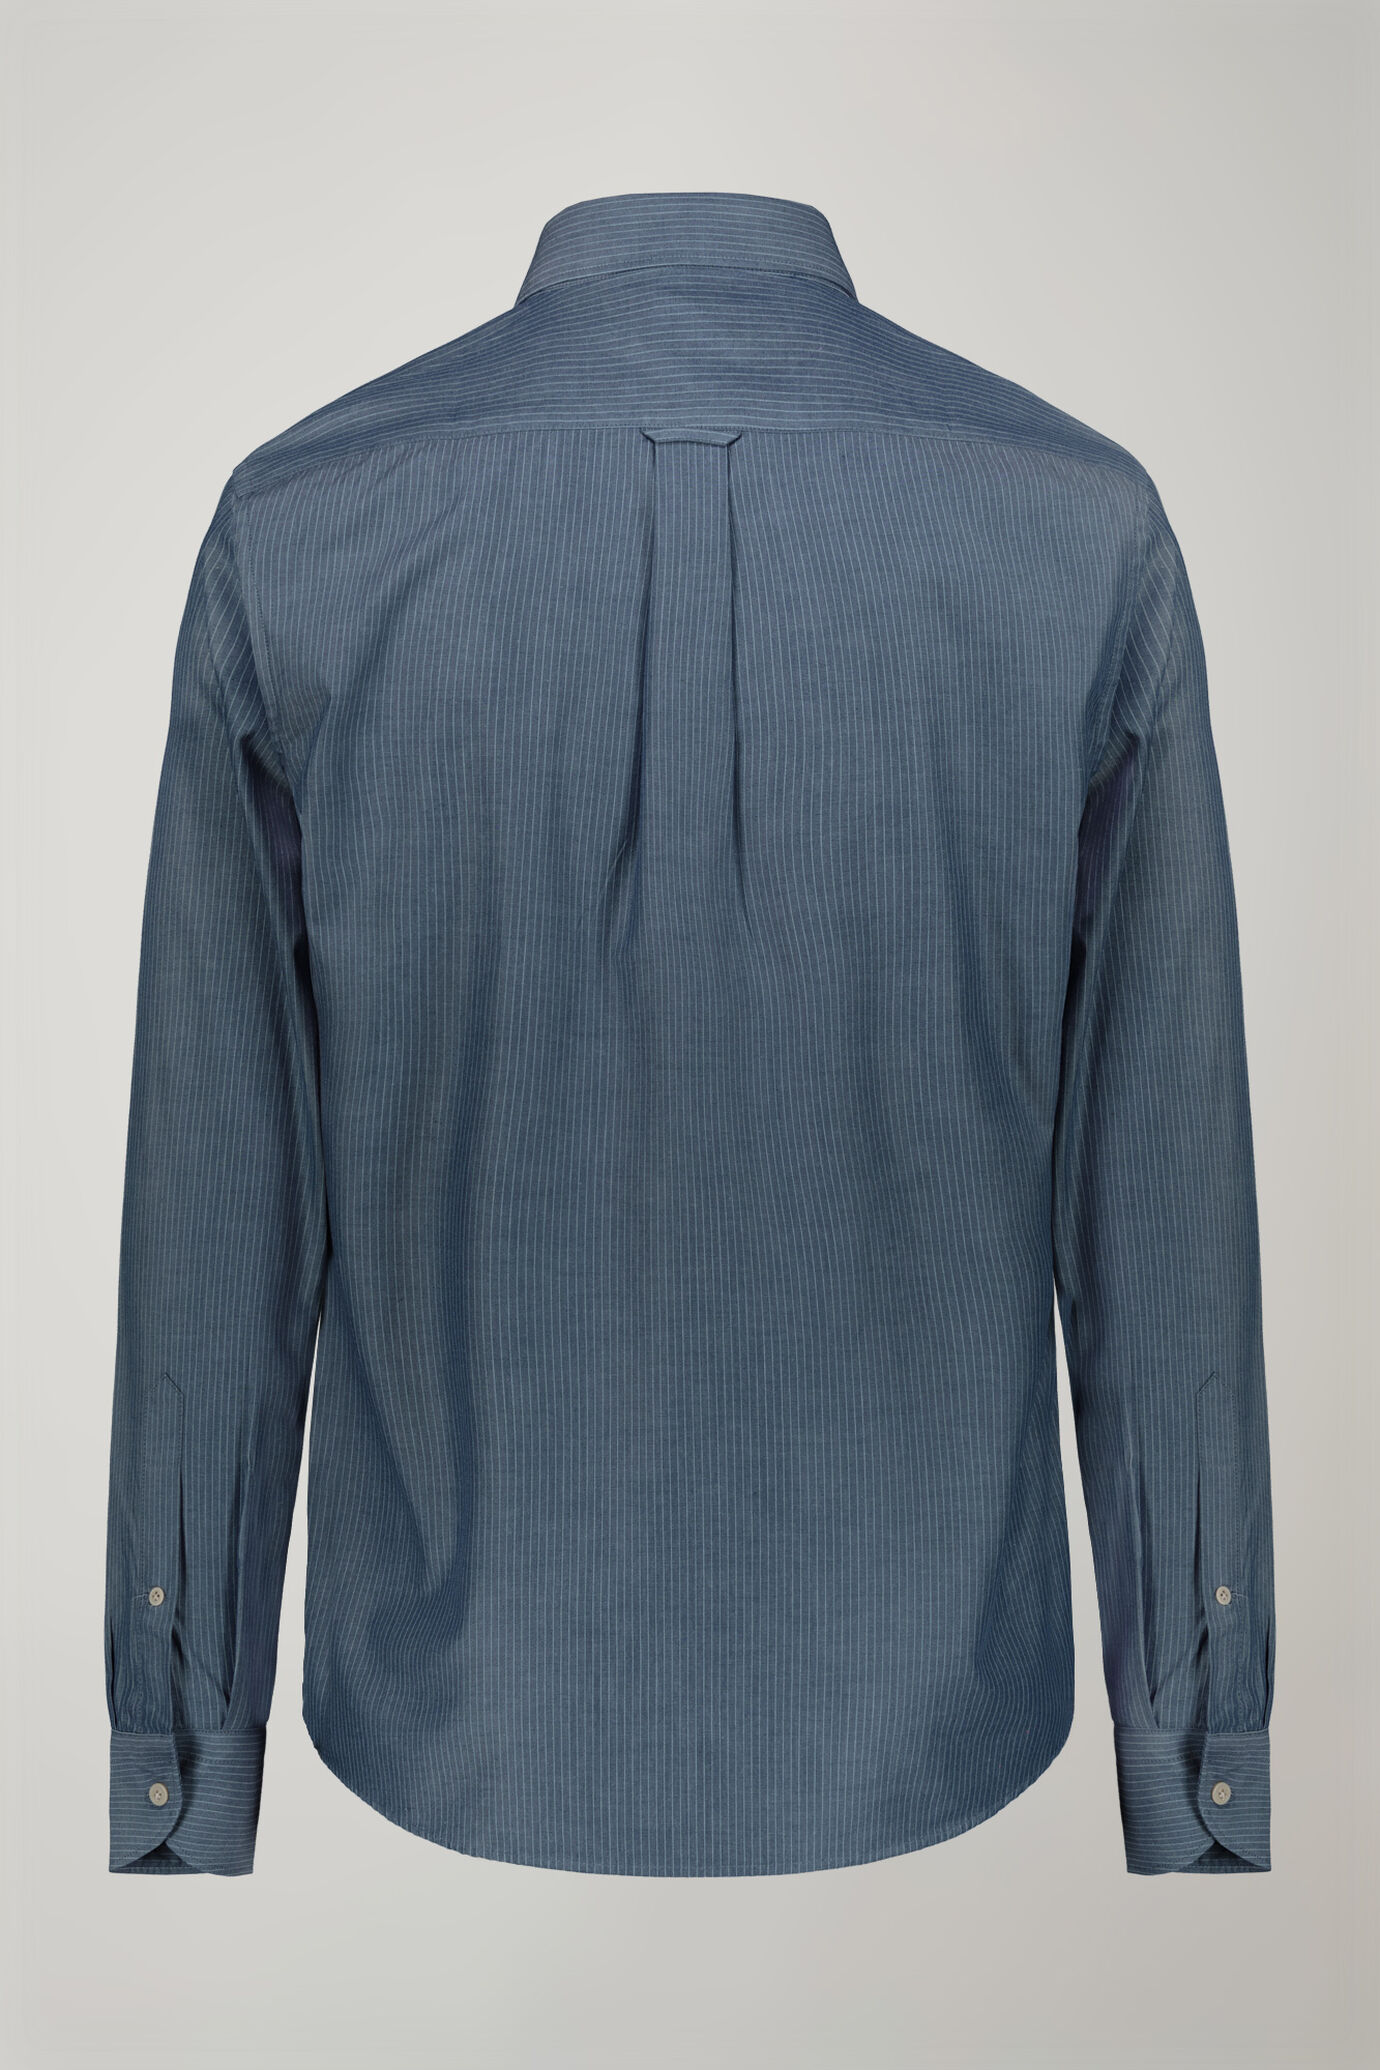 Men’s casual shirt with classic collar 100% cotton pinstriped fabric in denim comfort fit image number 6